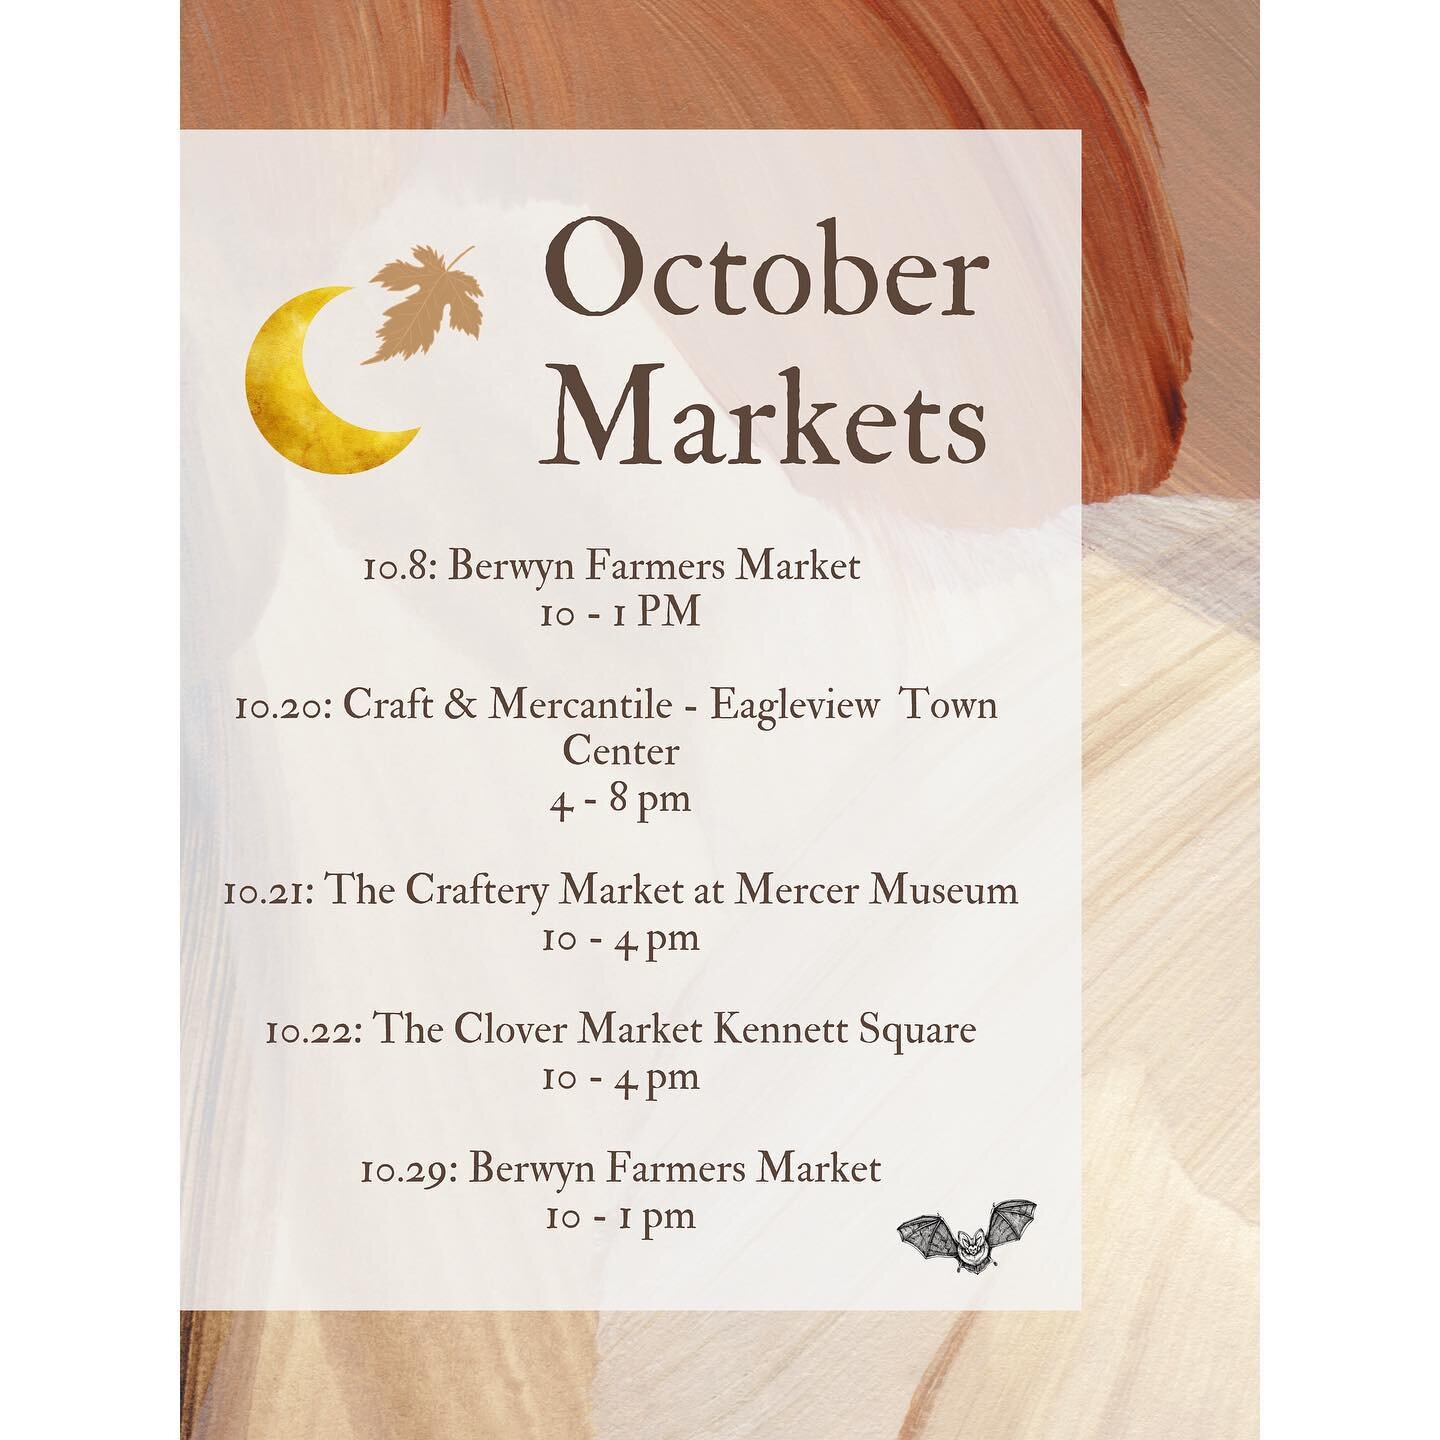 Good things are on the horizon. ✨

It's hard to believe that we are nearly halfway through October! I've got some great markets lined up and this weekend is jammed packed with three great events!

Catch me for the remainder of the month at the follow